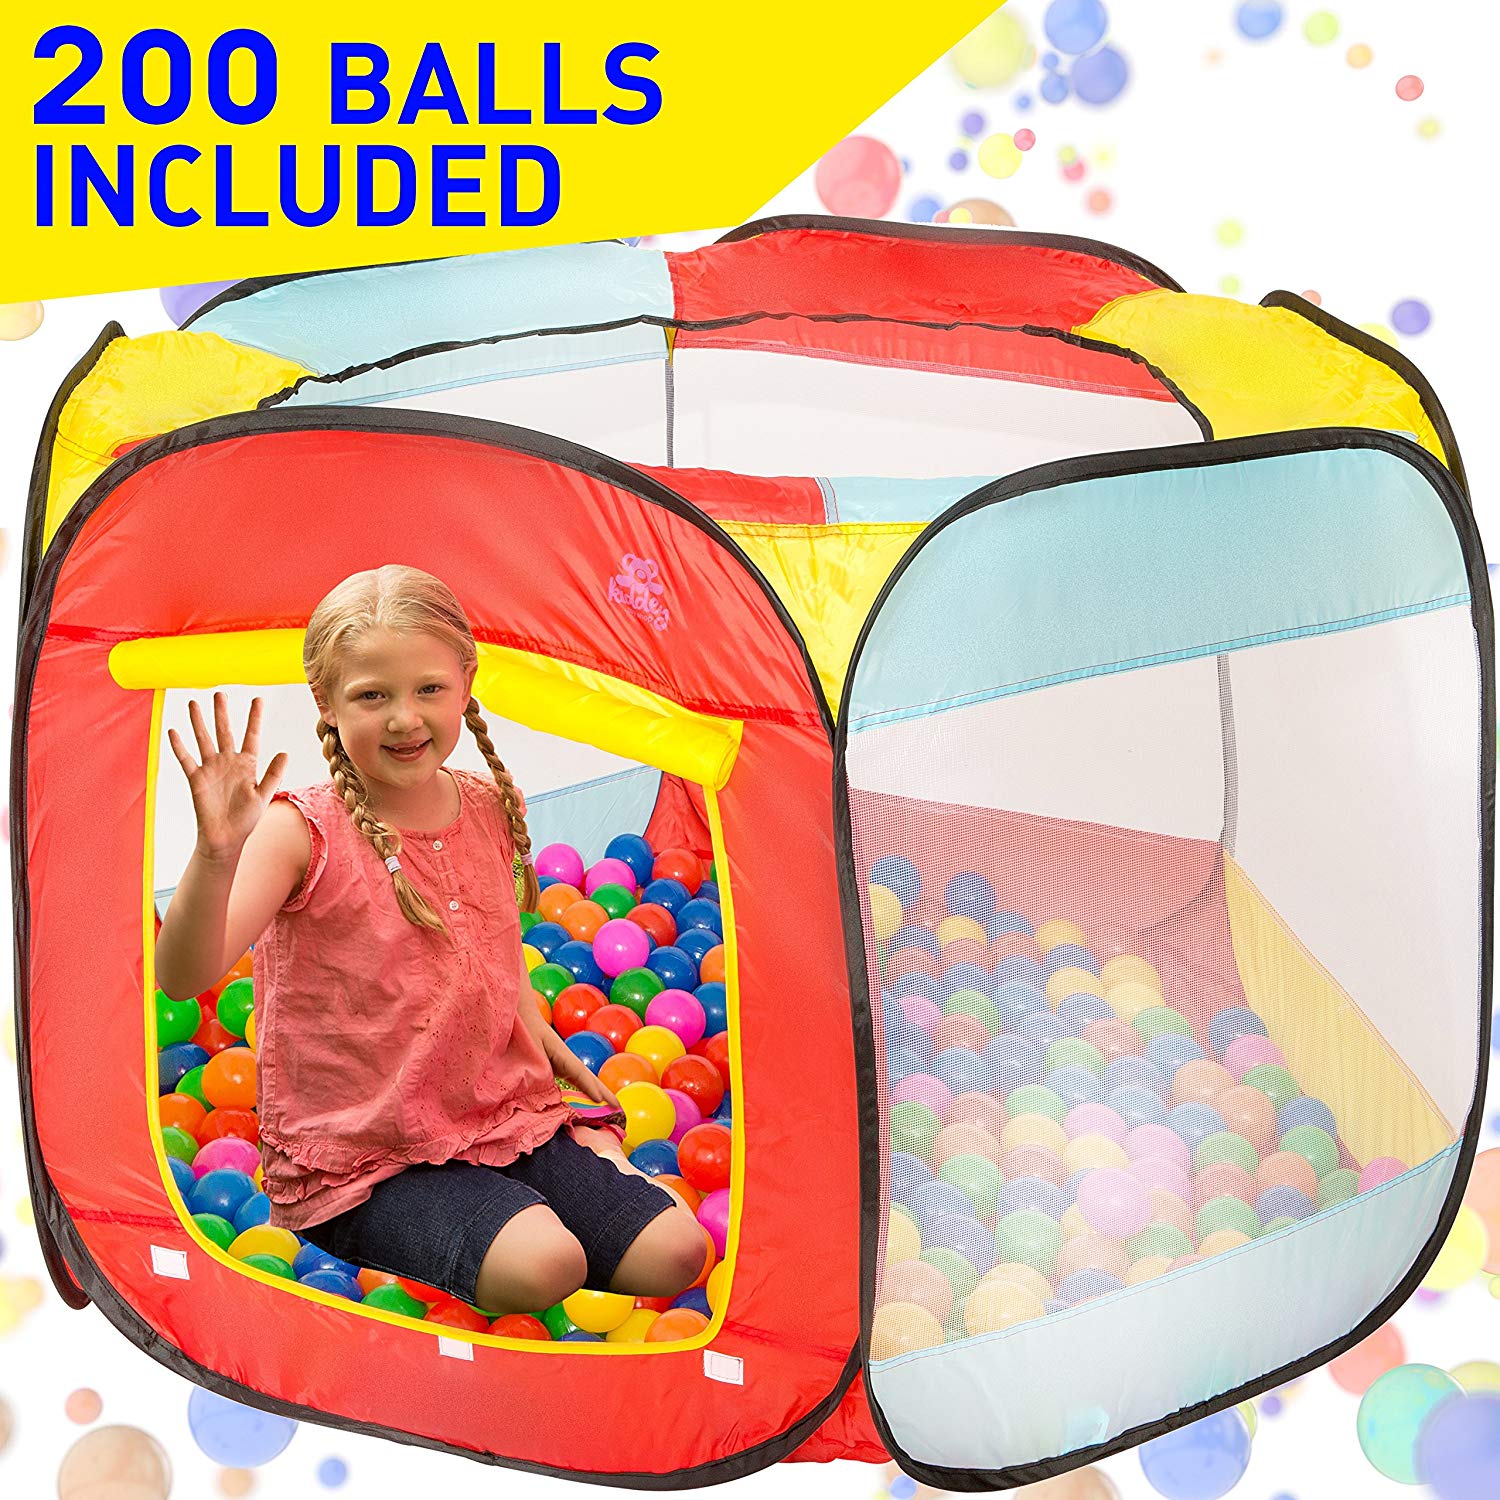 Foldable /& Portable Large Fabric Ball pits for Kids and Babies AGIMOLI Ball Pit for Toddlers Waterproof /& Durable Indoor Outdoor use Ball Pit playpen Blue, 4 Foot